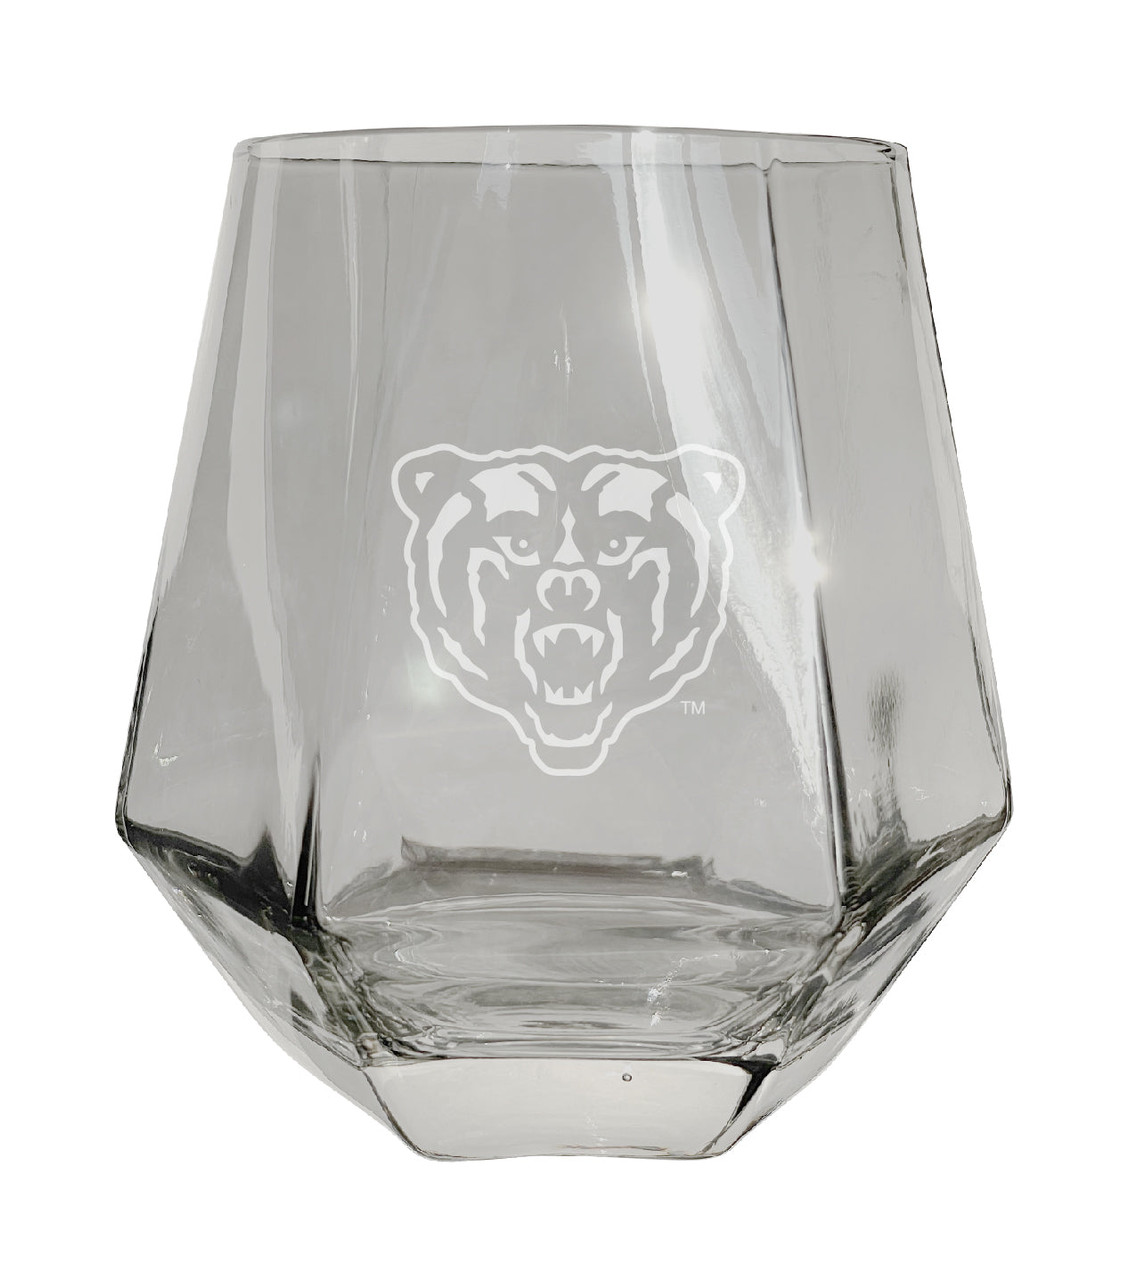 Mercer University Etched Diamond Cut Stemless 10 ounce Wine Glass Clear